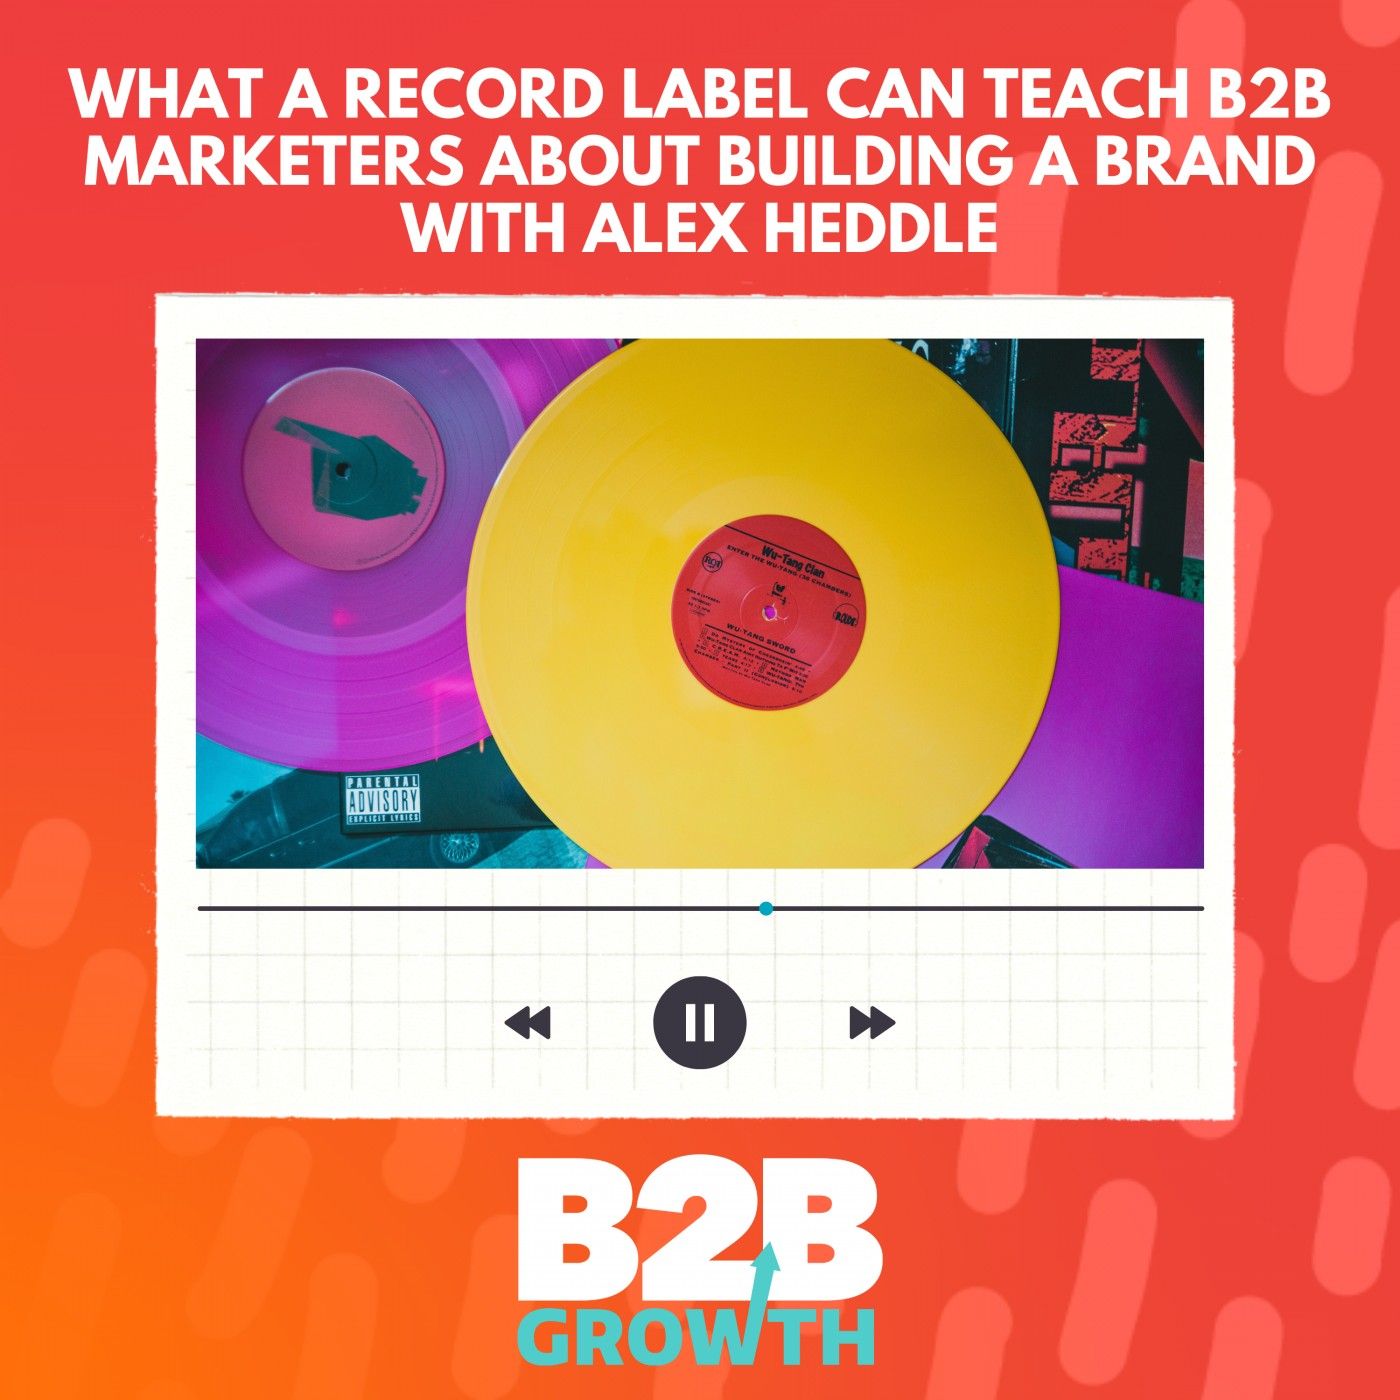 What a Record Label Can Teach B2B Marketers About Building a Brand, with Alex Heddle